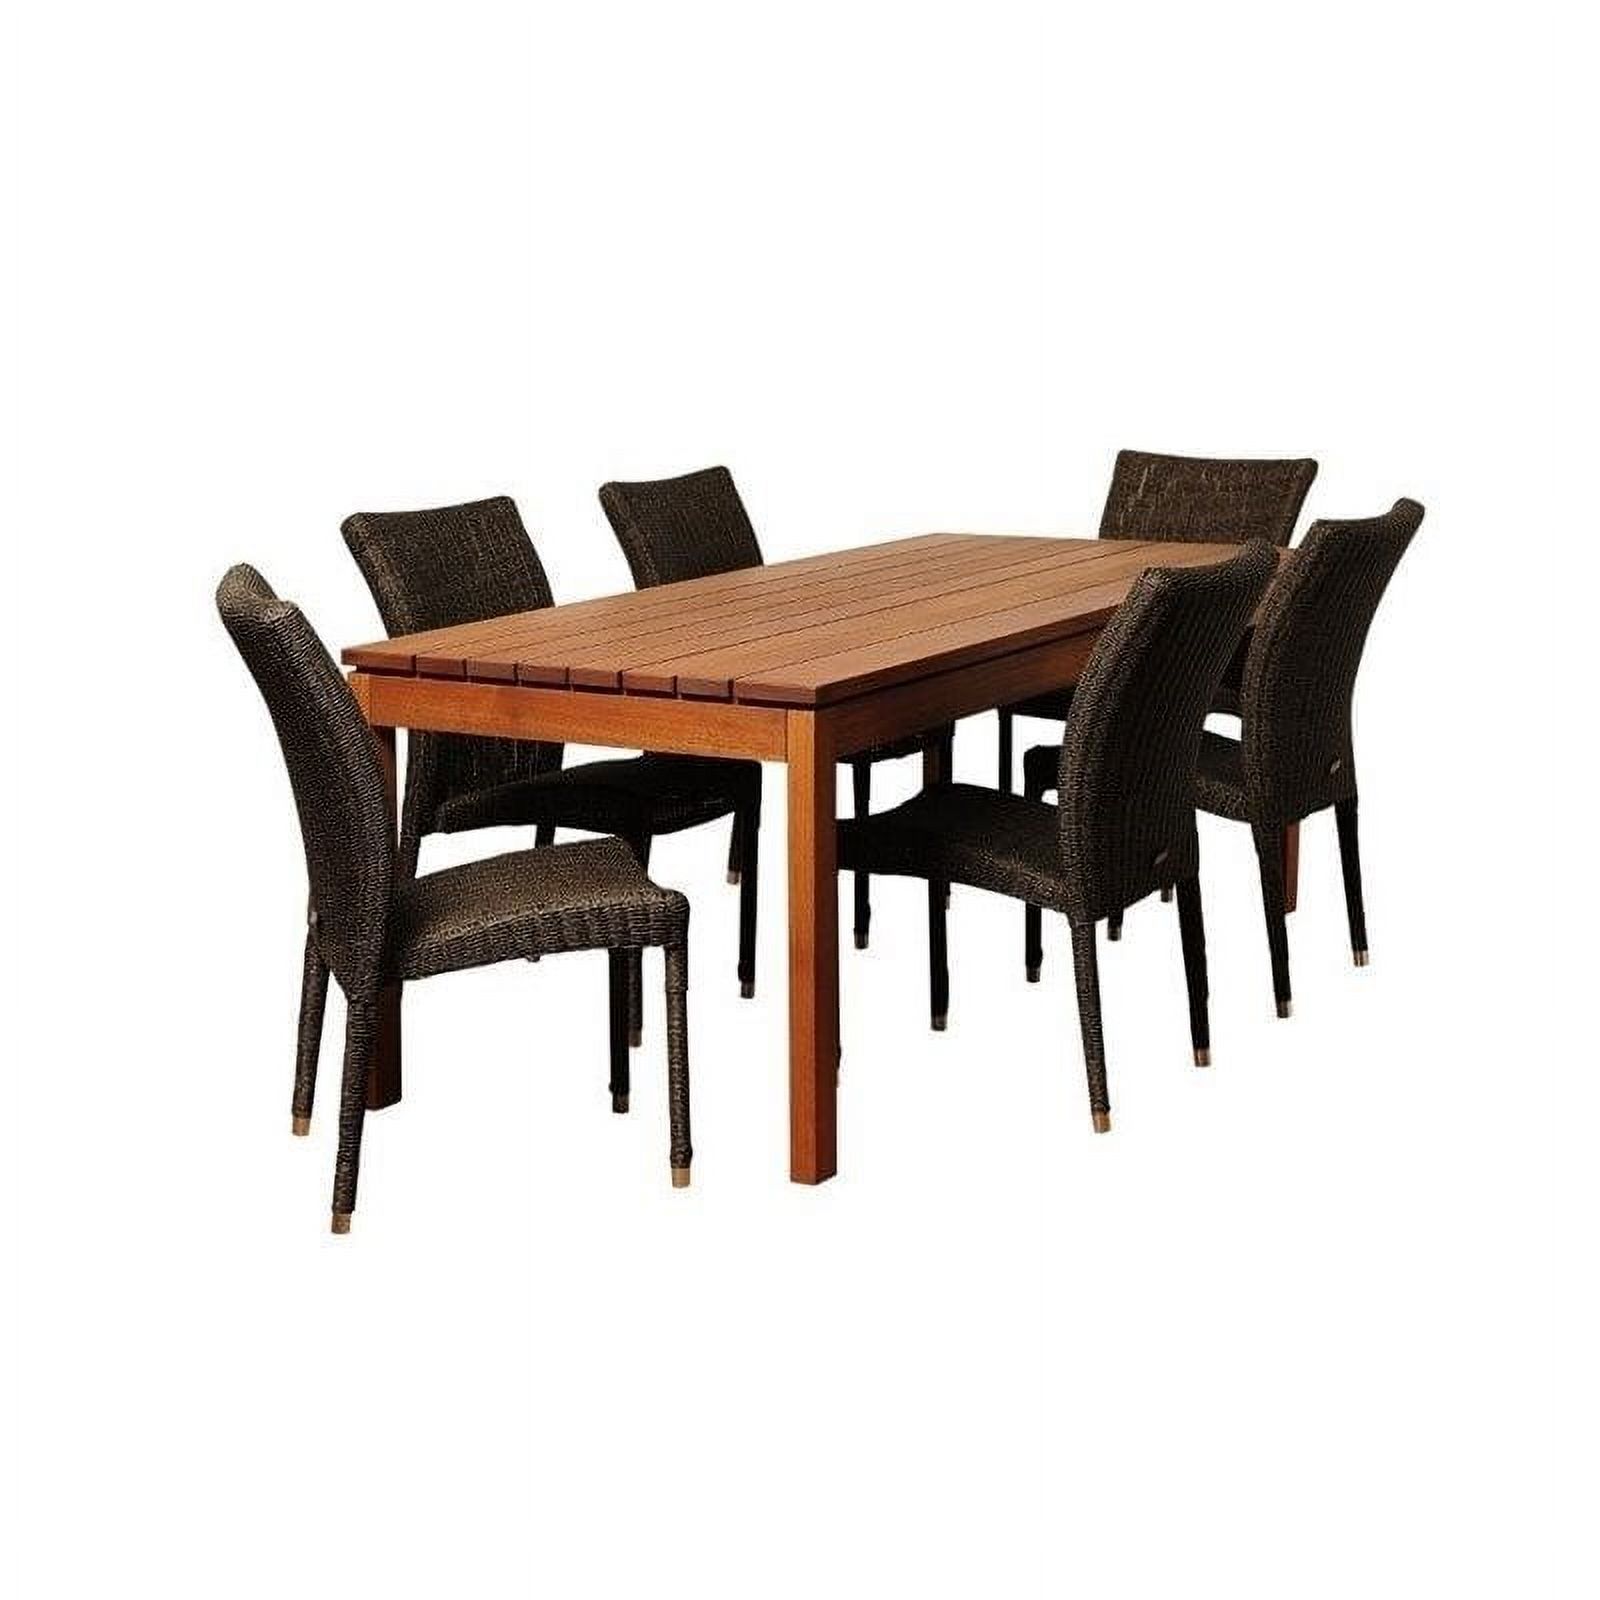 Amazonia Jamison 7-Piece 100% FSC Solid Wood and Eco-Friendly Wicker Rectangular Patio Dining Set - image 2 of 14